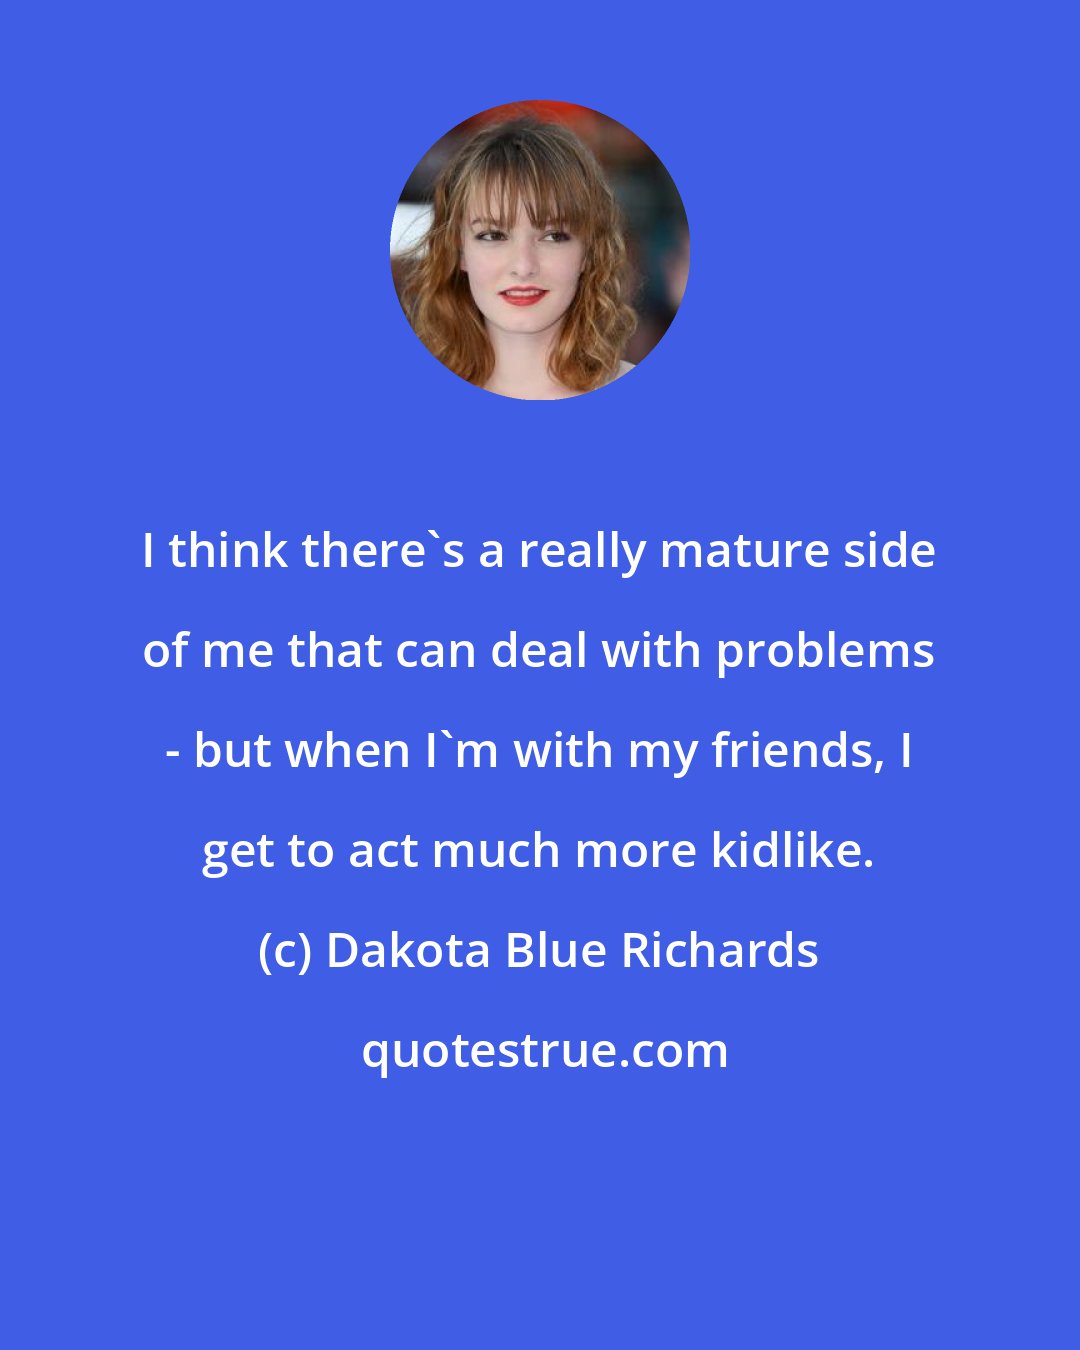 Dakota Blue Richards: I think there's a really mature side of me that can deal with problems - but when I'm with my friends, I get to act much more kidlike.